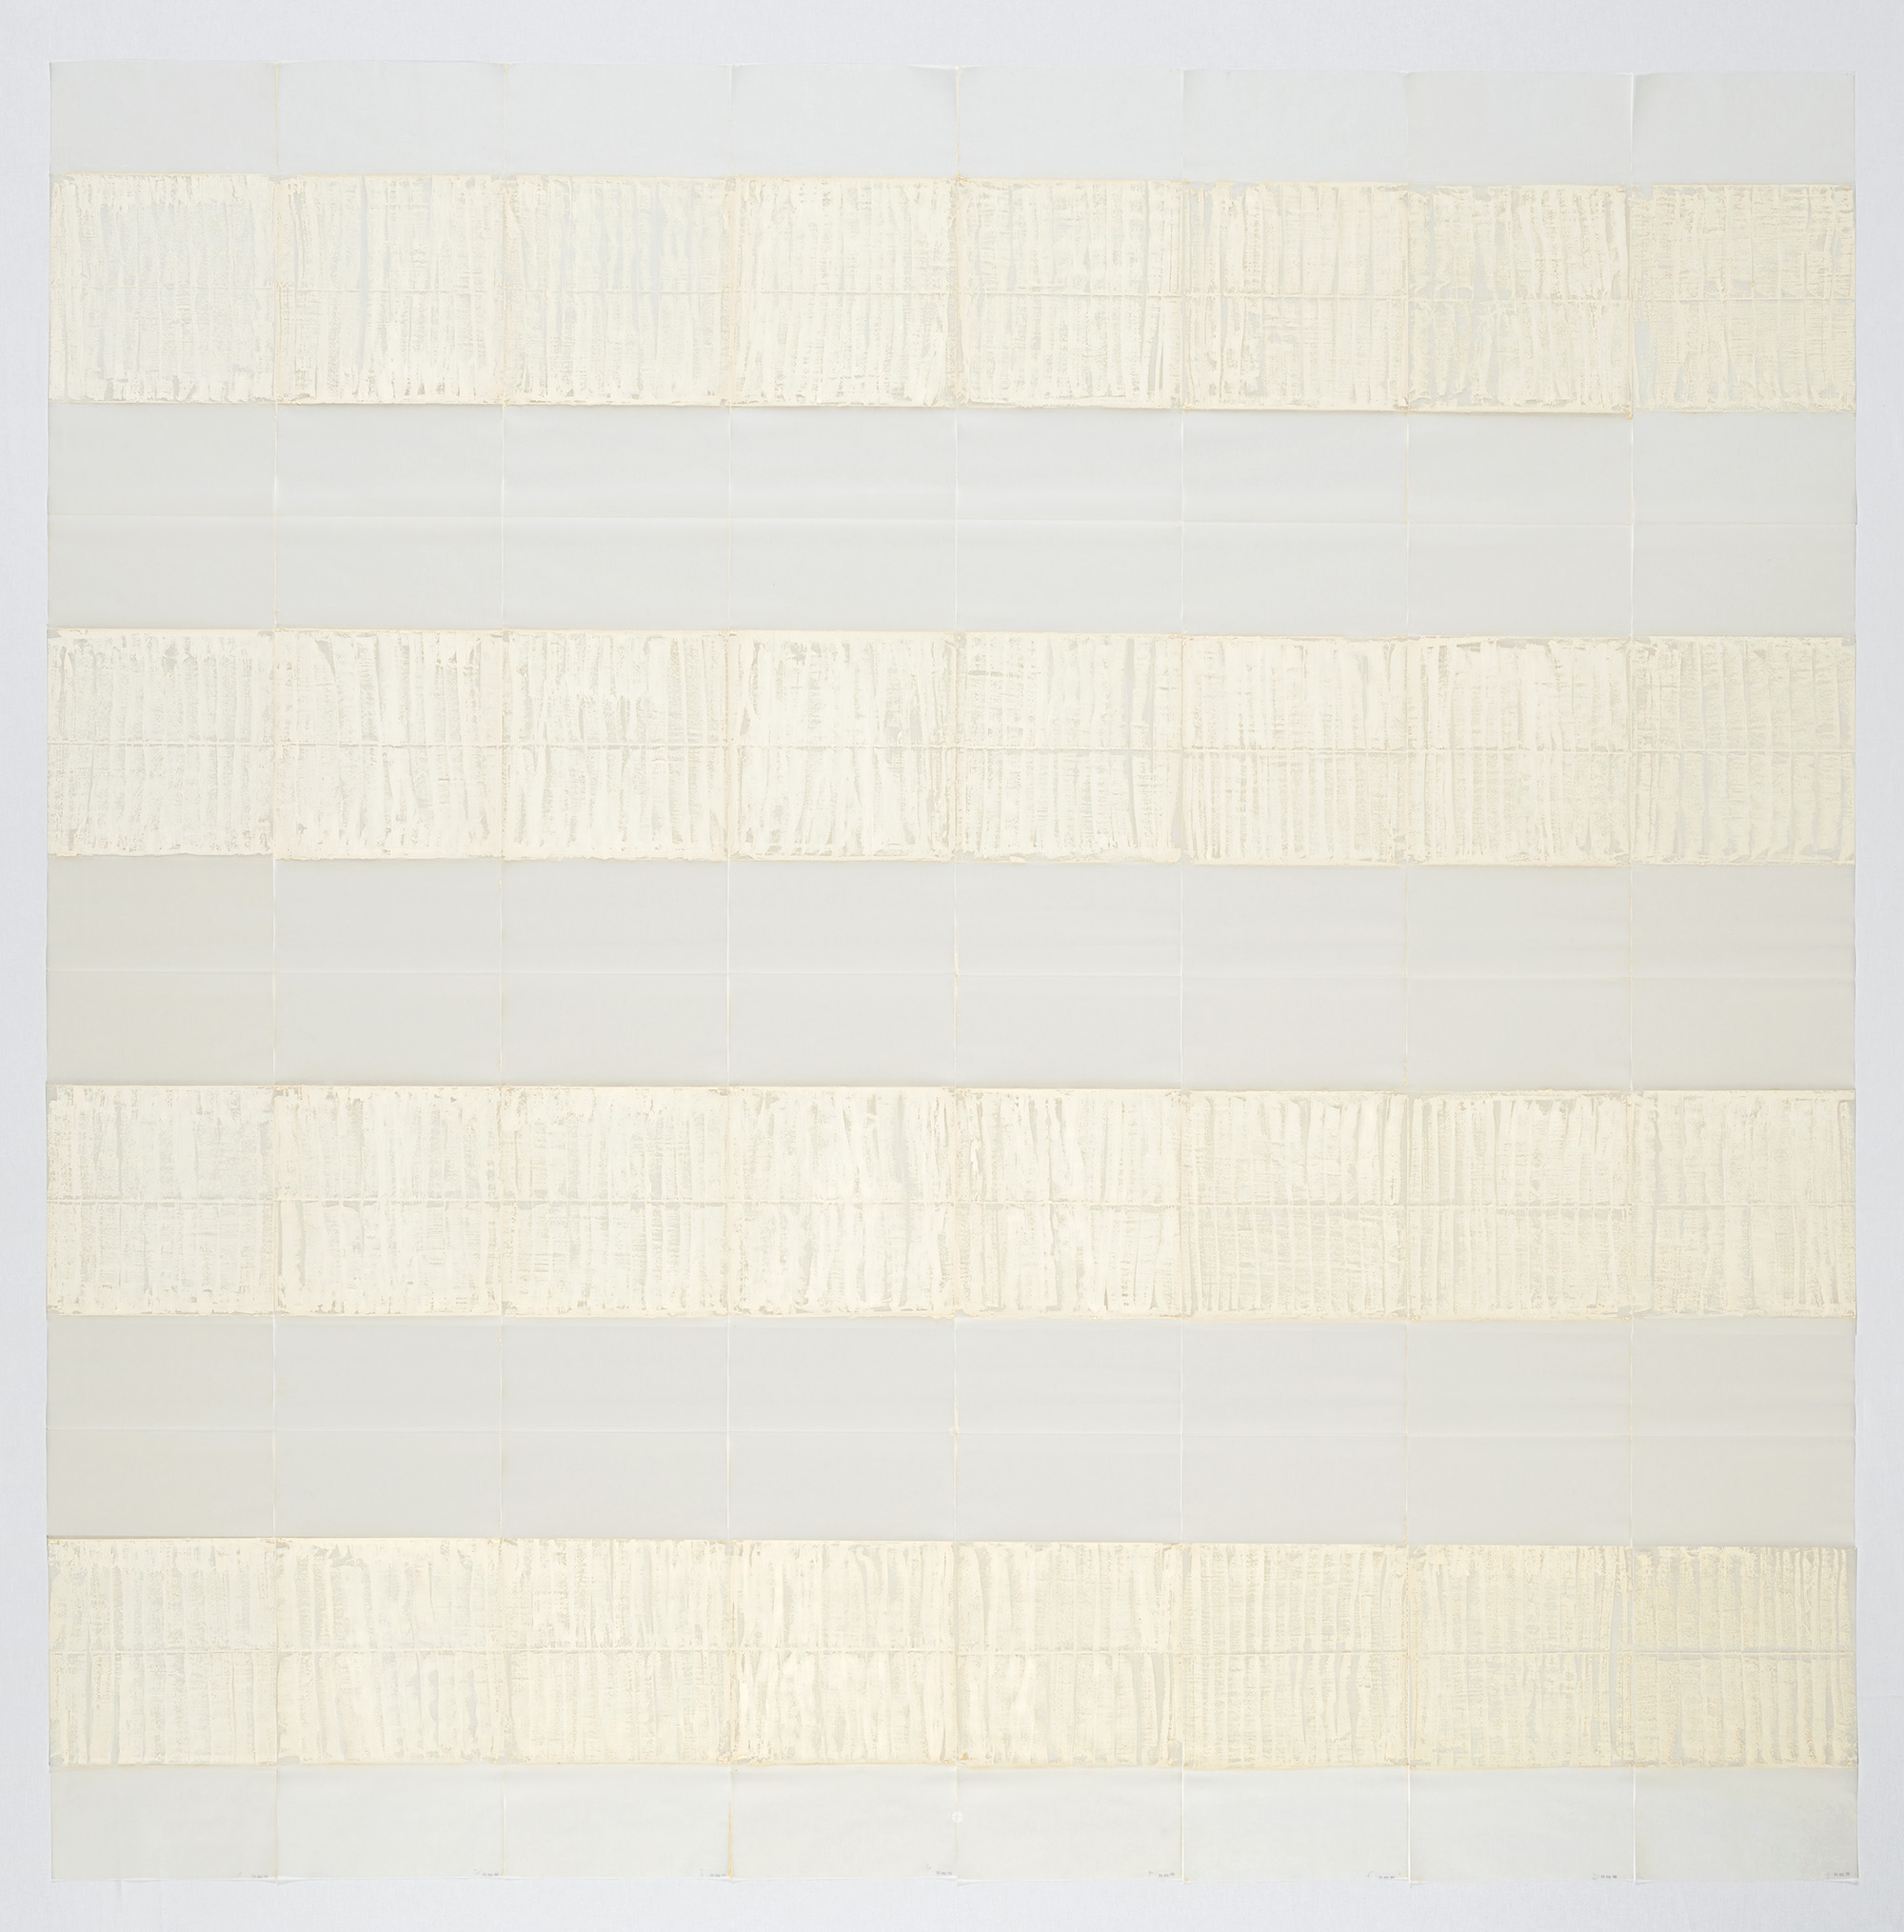 Michel Parmentier, <i>26 mars 1991</i>, 1991. Oil bar blanc applied flat, vertically, on tracing paper, 7 alternating horizontal bands, 38 cm wide (4+3) and, at the top and the bottom, 2 partial unpainted bands of 19 cm. 304 x 300 cm. Eli and Edythe Broad Art Museum, Michigan State University, Purchase. © ADAGP, Paris. The Estate of Michel Parmentier. AMP - Fonds Michel Parmentier, Bruxelles. Courtesy Galerie Loevenbruck, Paris. Photo: Philippe de Gobert